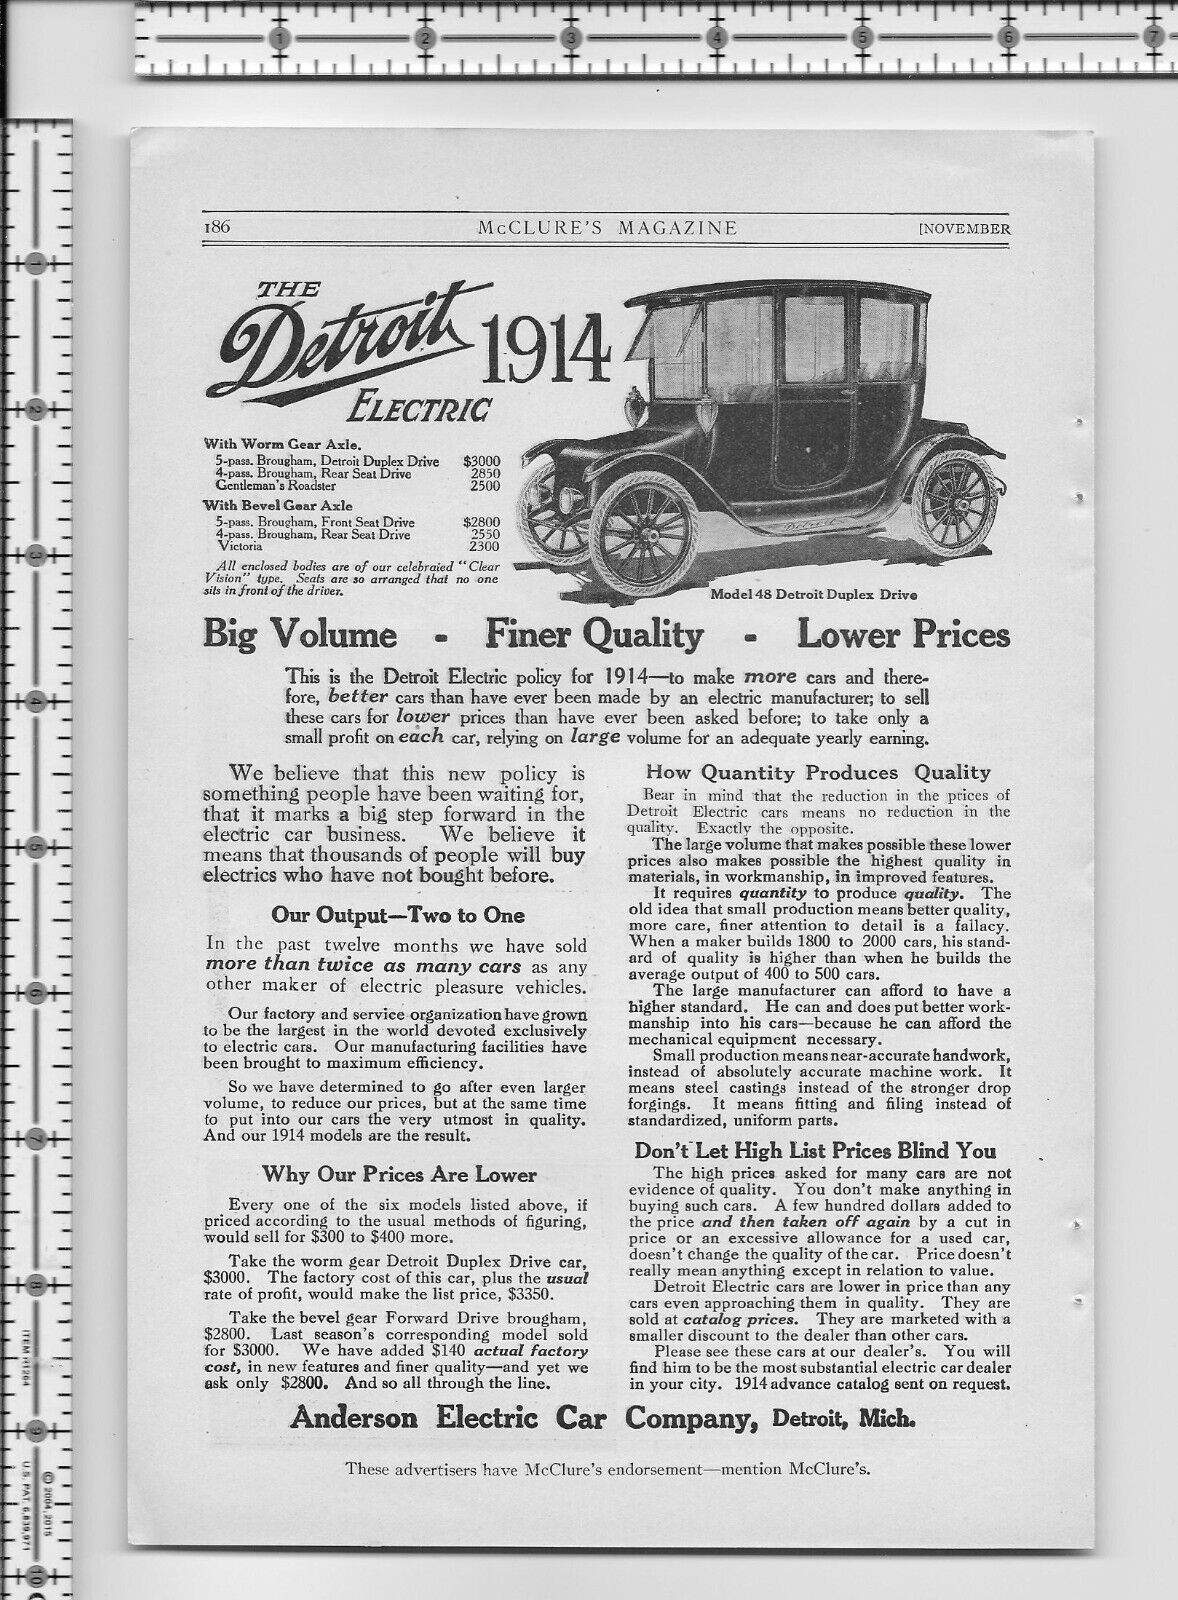 Anderson Electric Car Co. The Detroit Electric 1914 car - 1913 magazine print ad